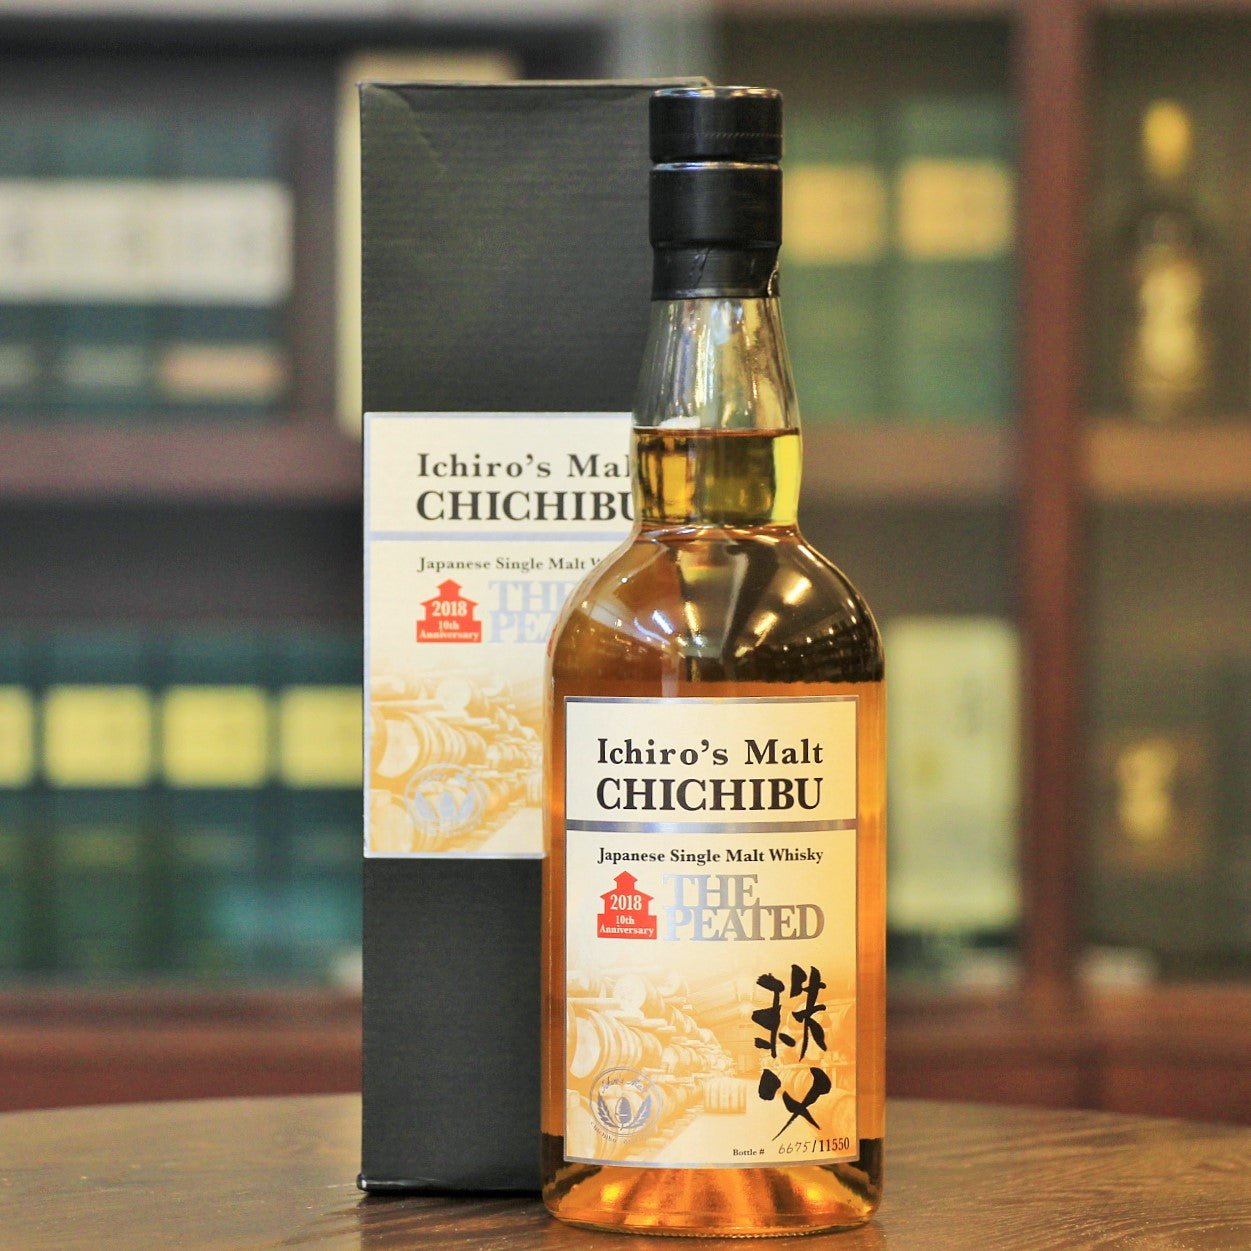 Peated Whisky 2018 from Chichibu Distillery in Japan. Now available on online whisky retailer Mizunara The Shop in Hong Kong